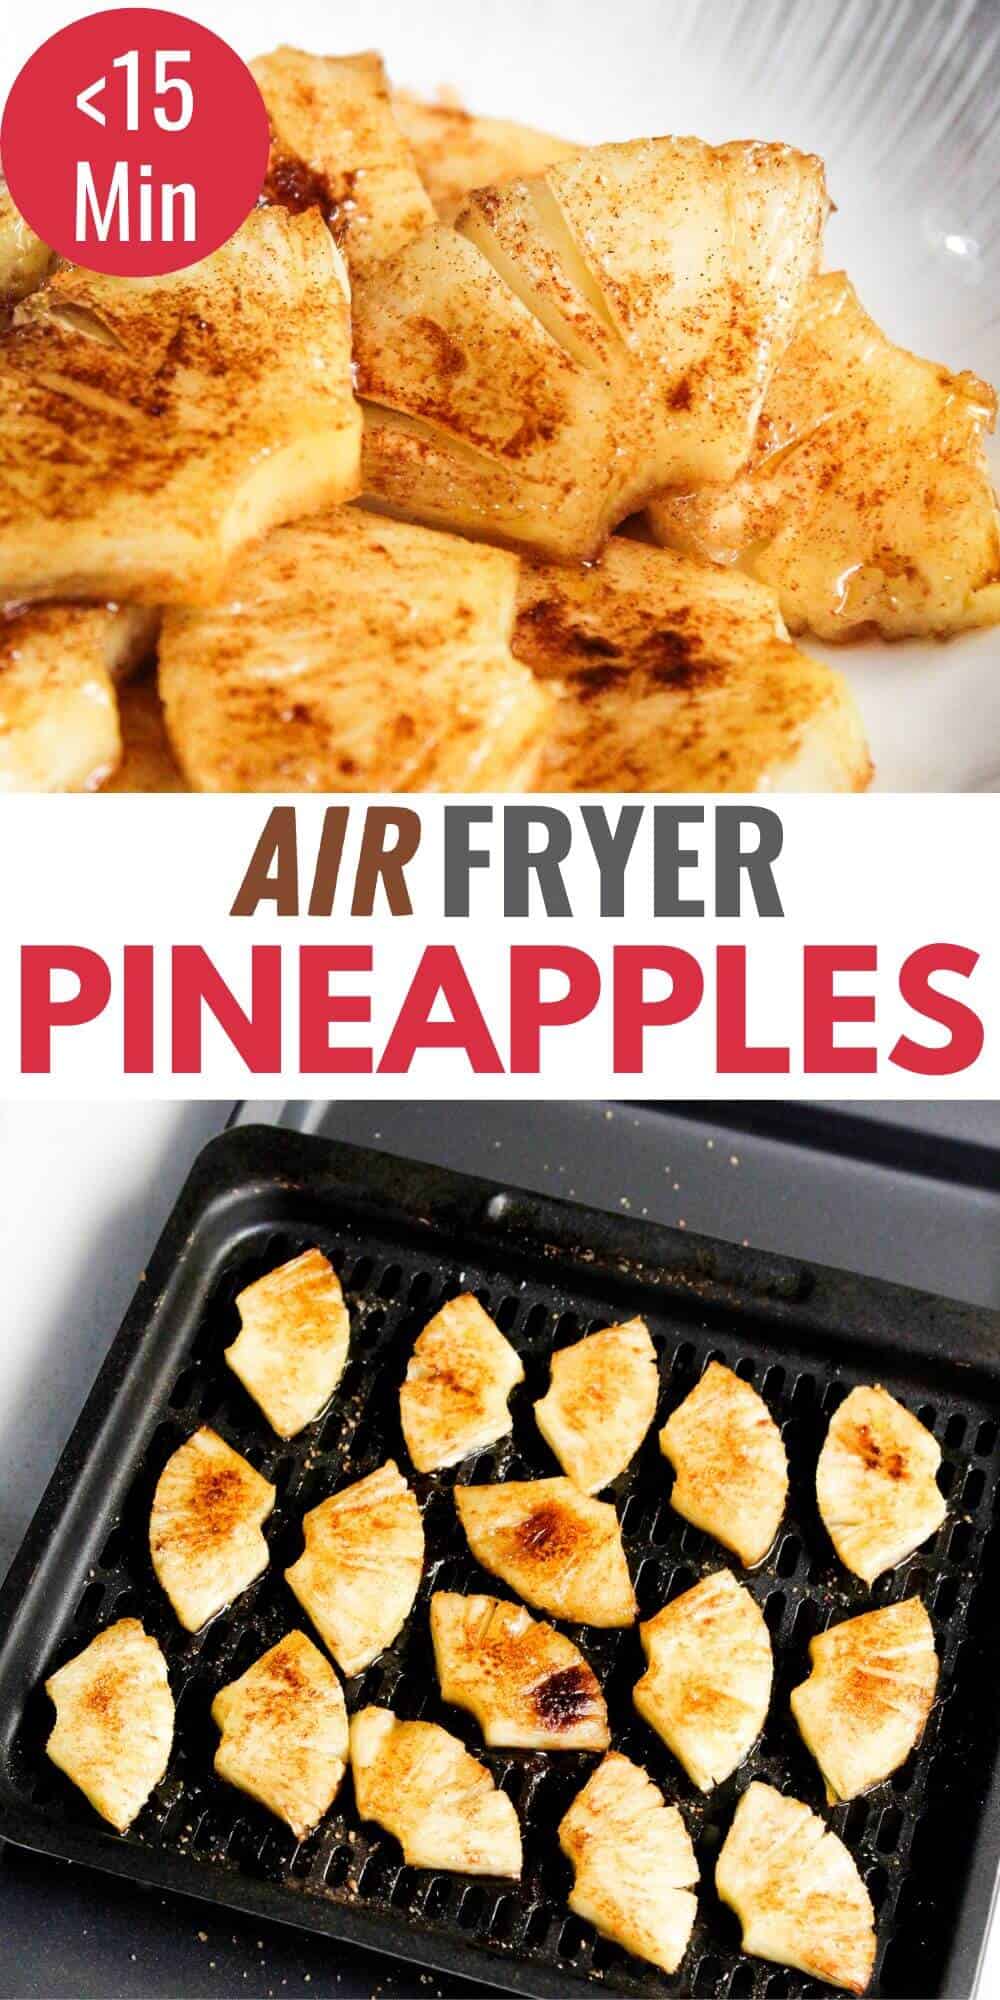 Air fryer pineapples with the text air fryer pineapples.